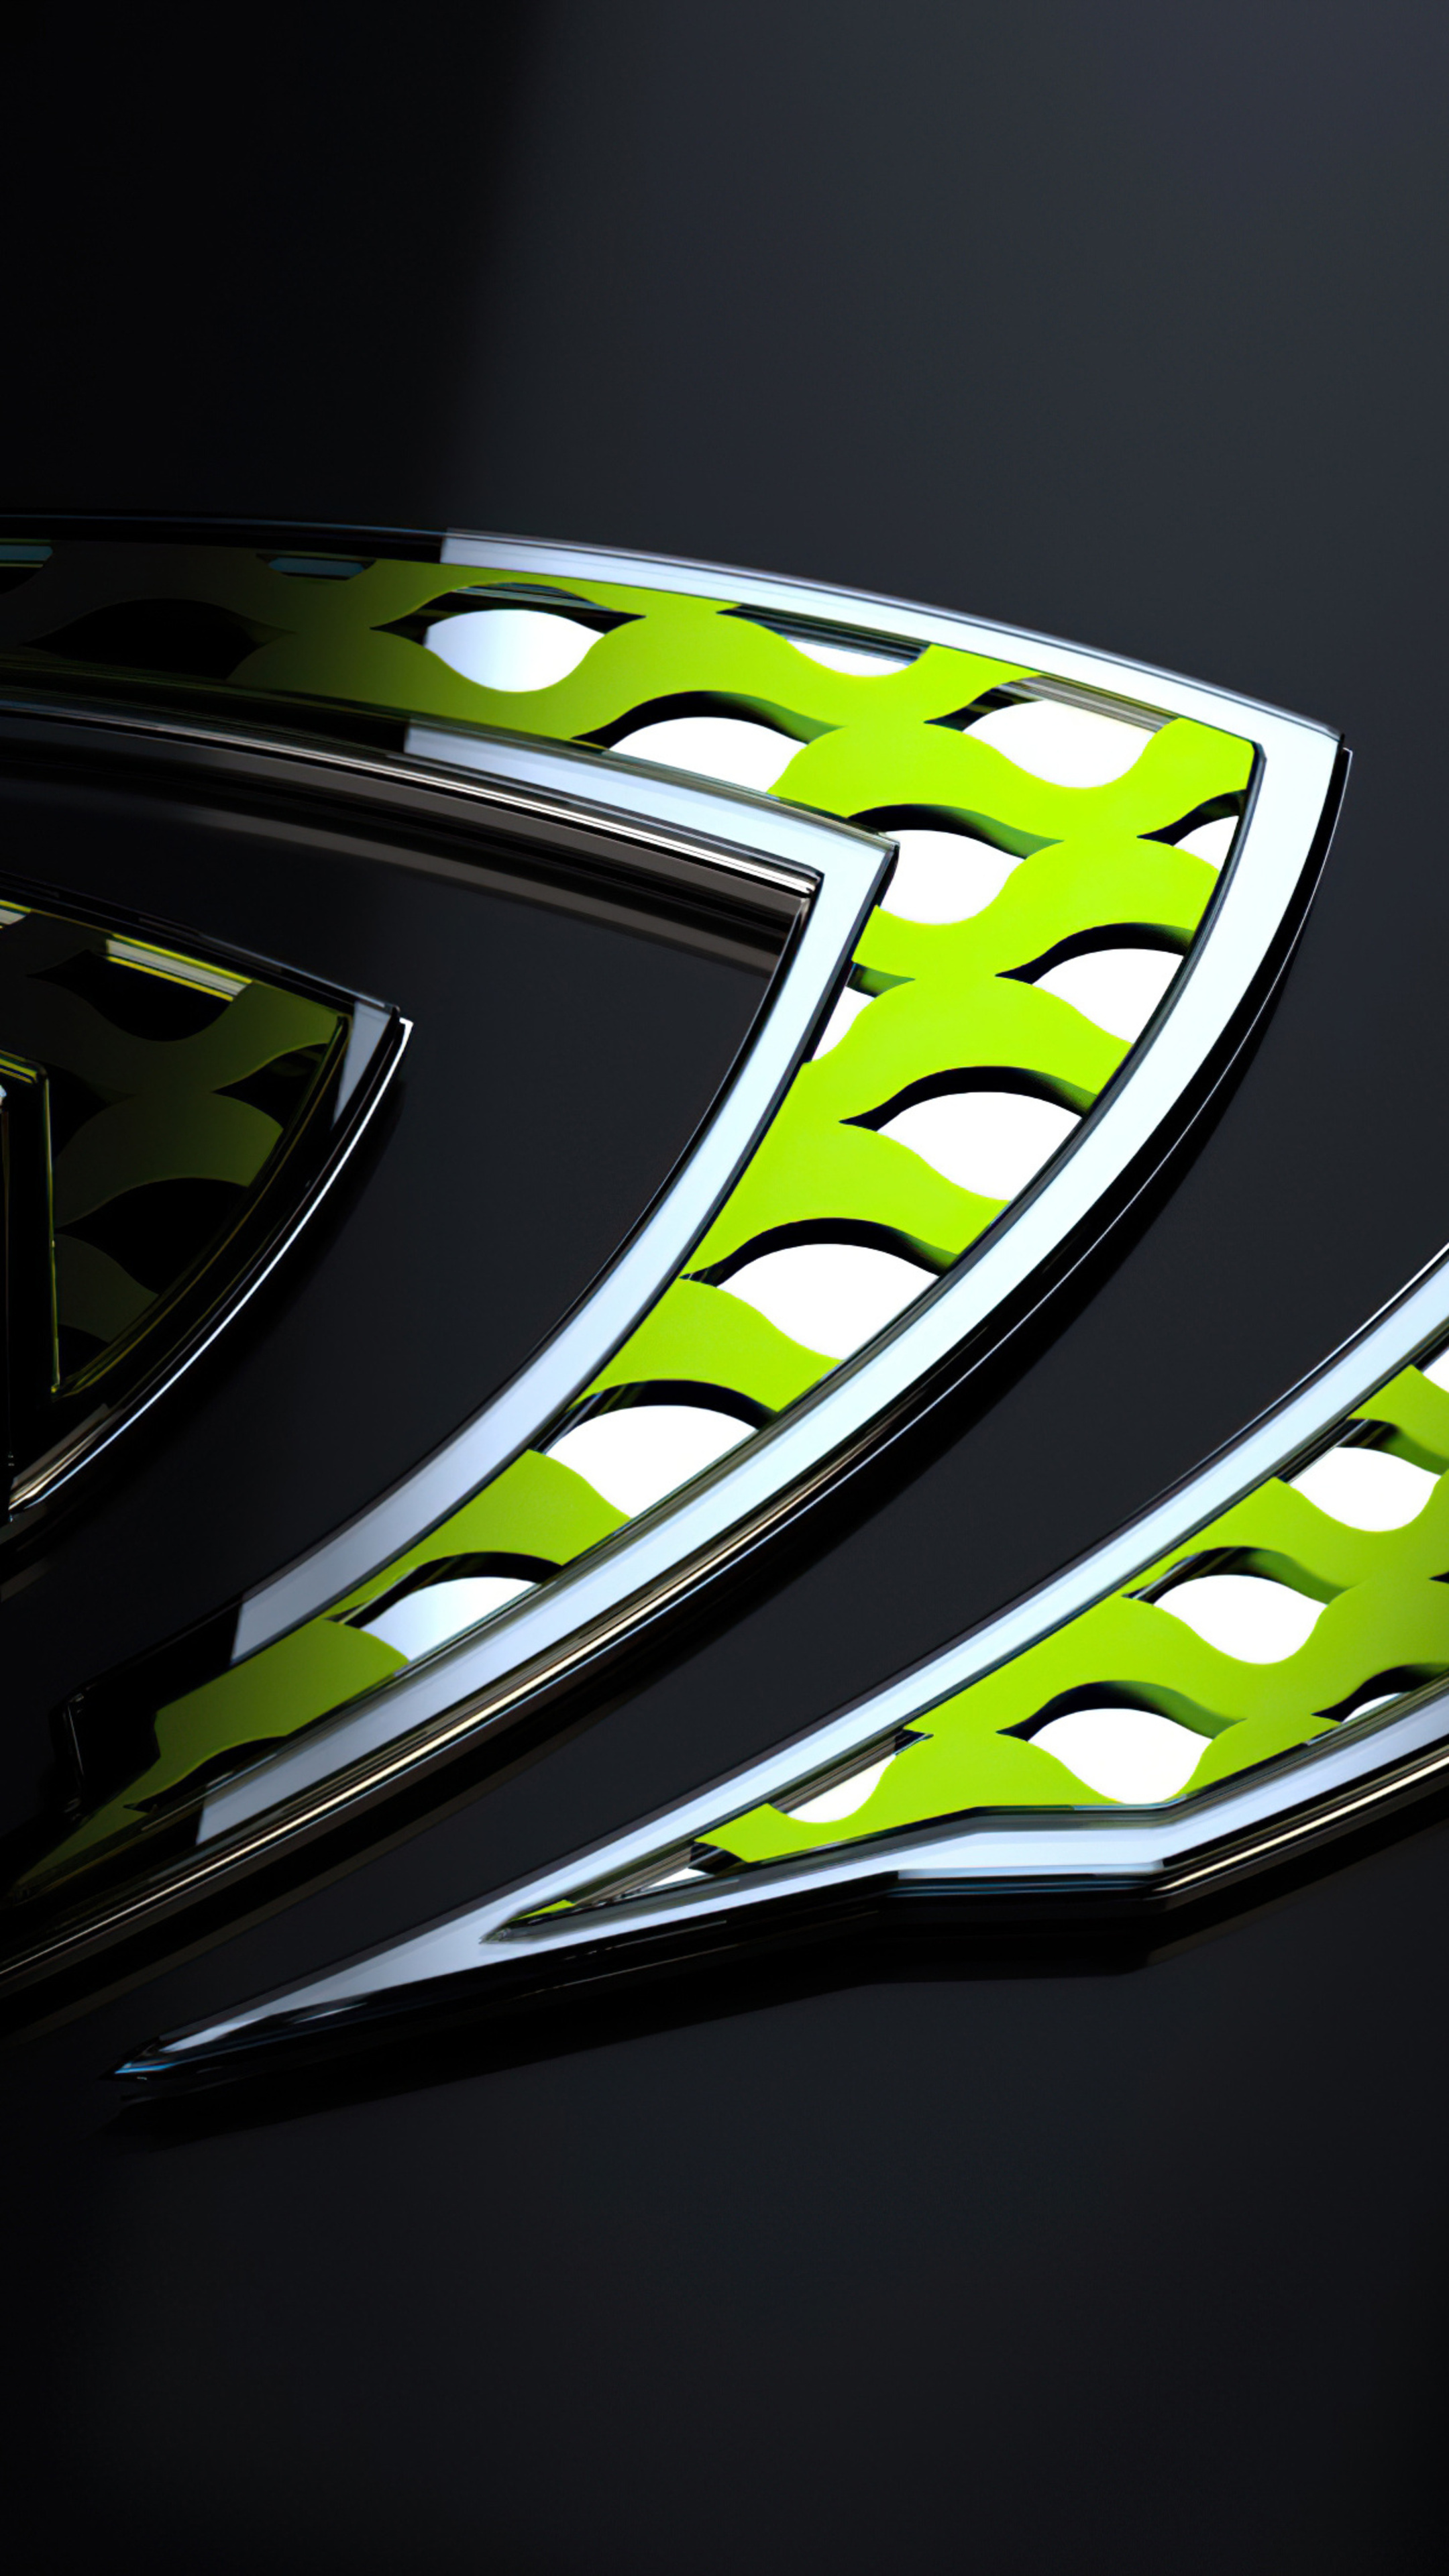 Nvidia: GPUs used for edge to cloud computing, Supercomputers, Innovation. 2160x3840 4K Wallpaper.